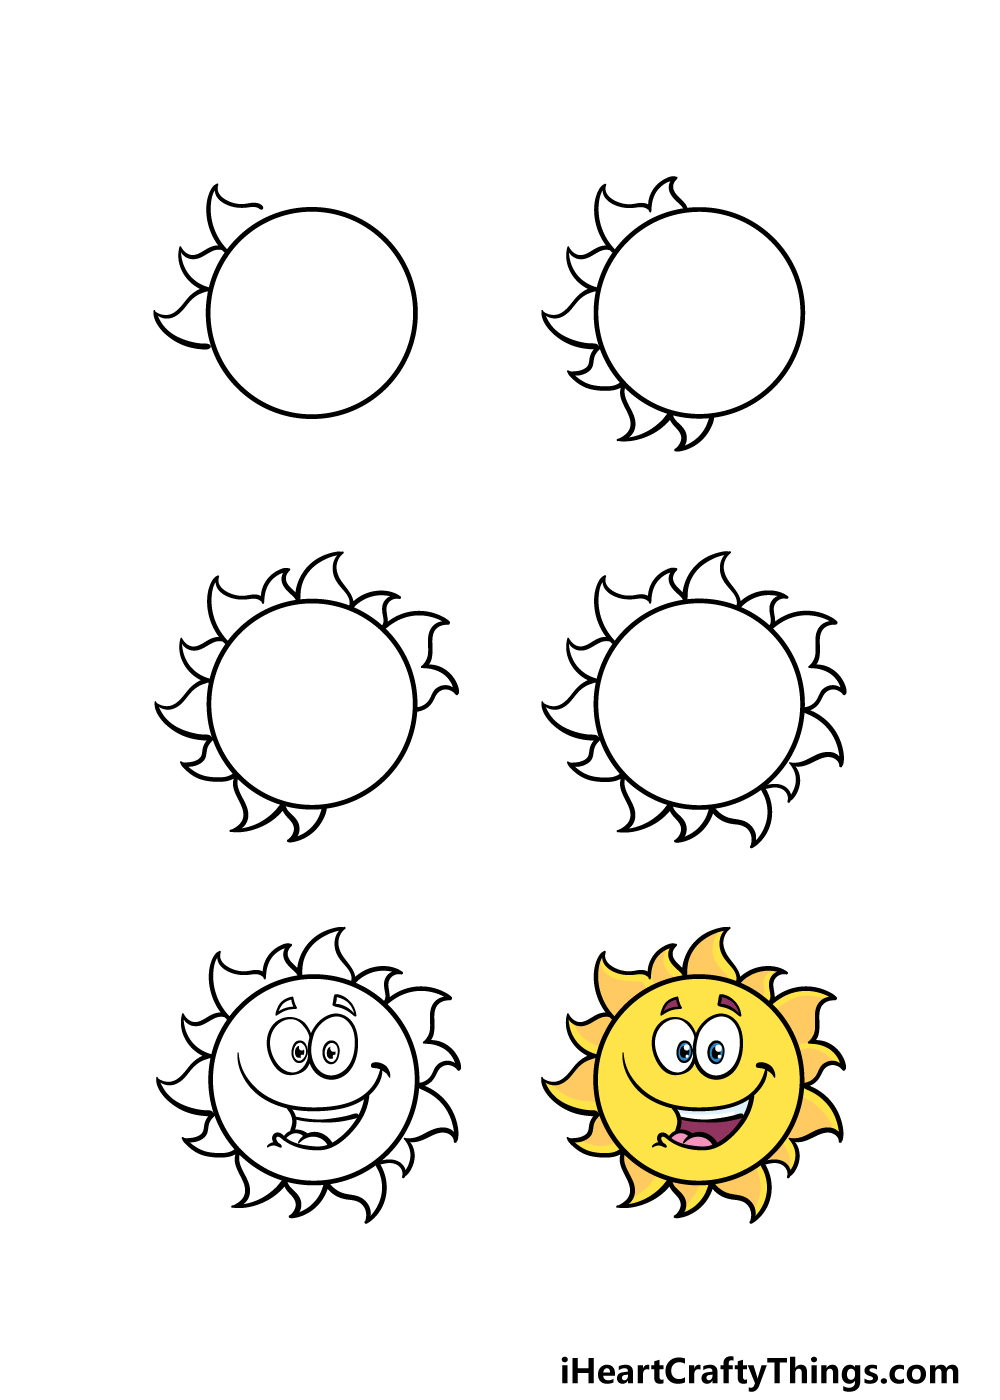 how to draw a cartoon sun in 6 steps